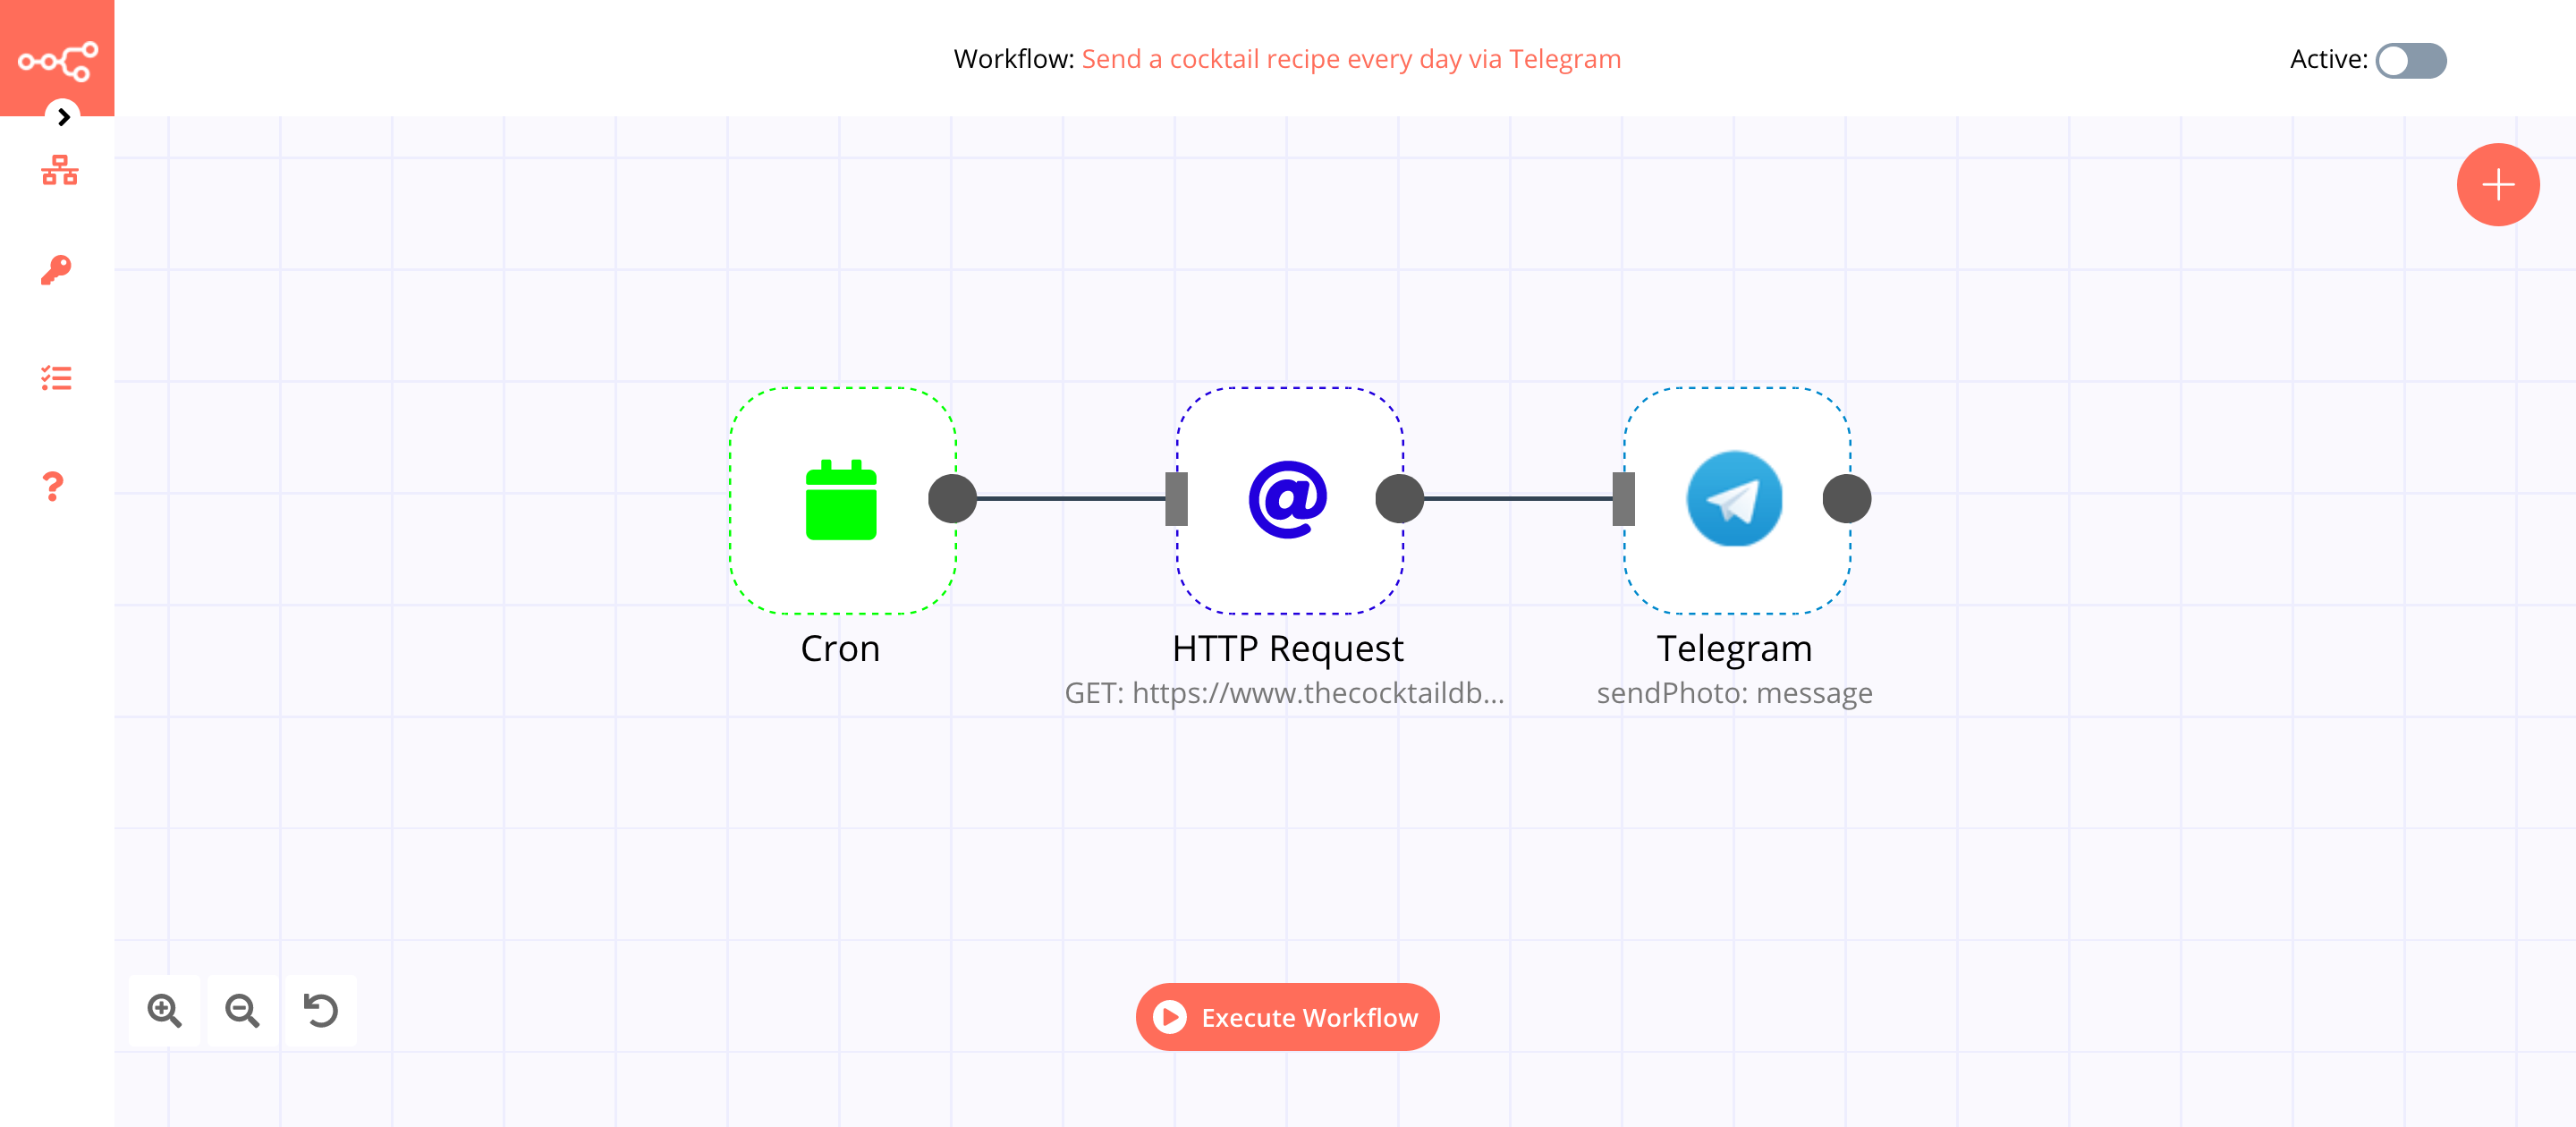 A workflow with the Telegram node